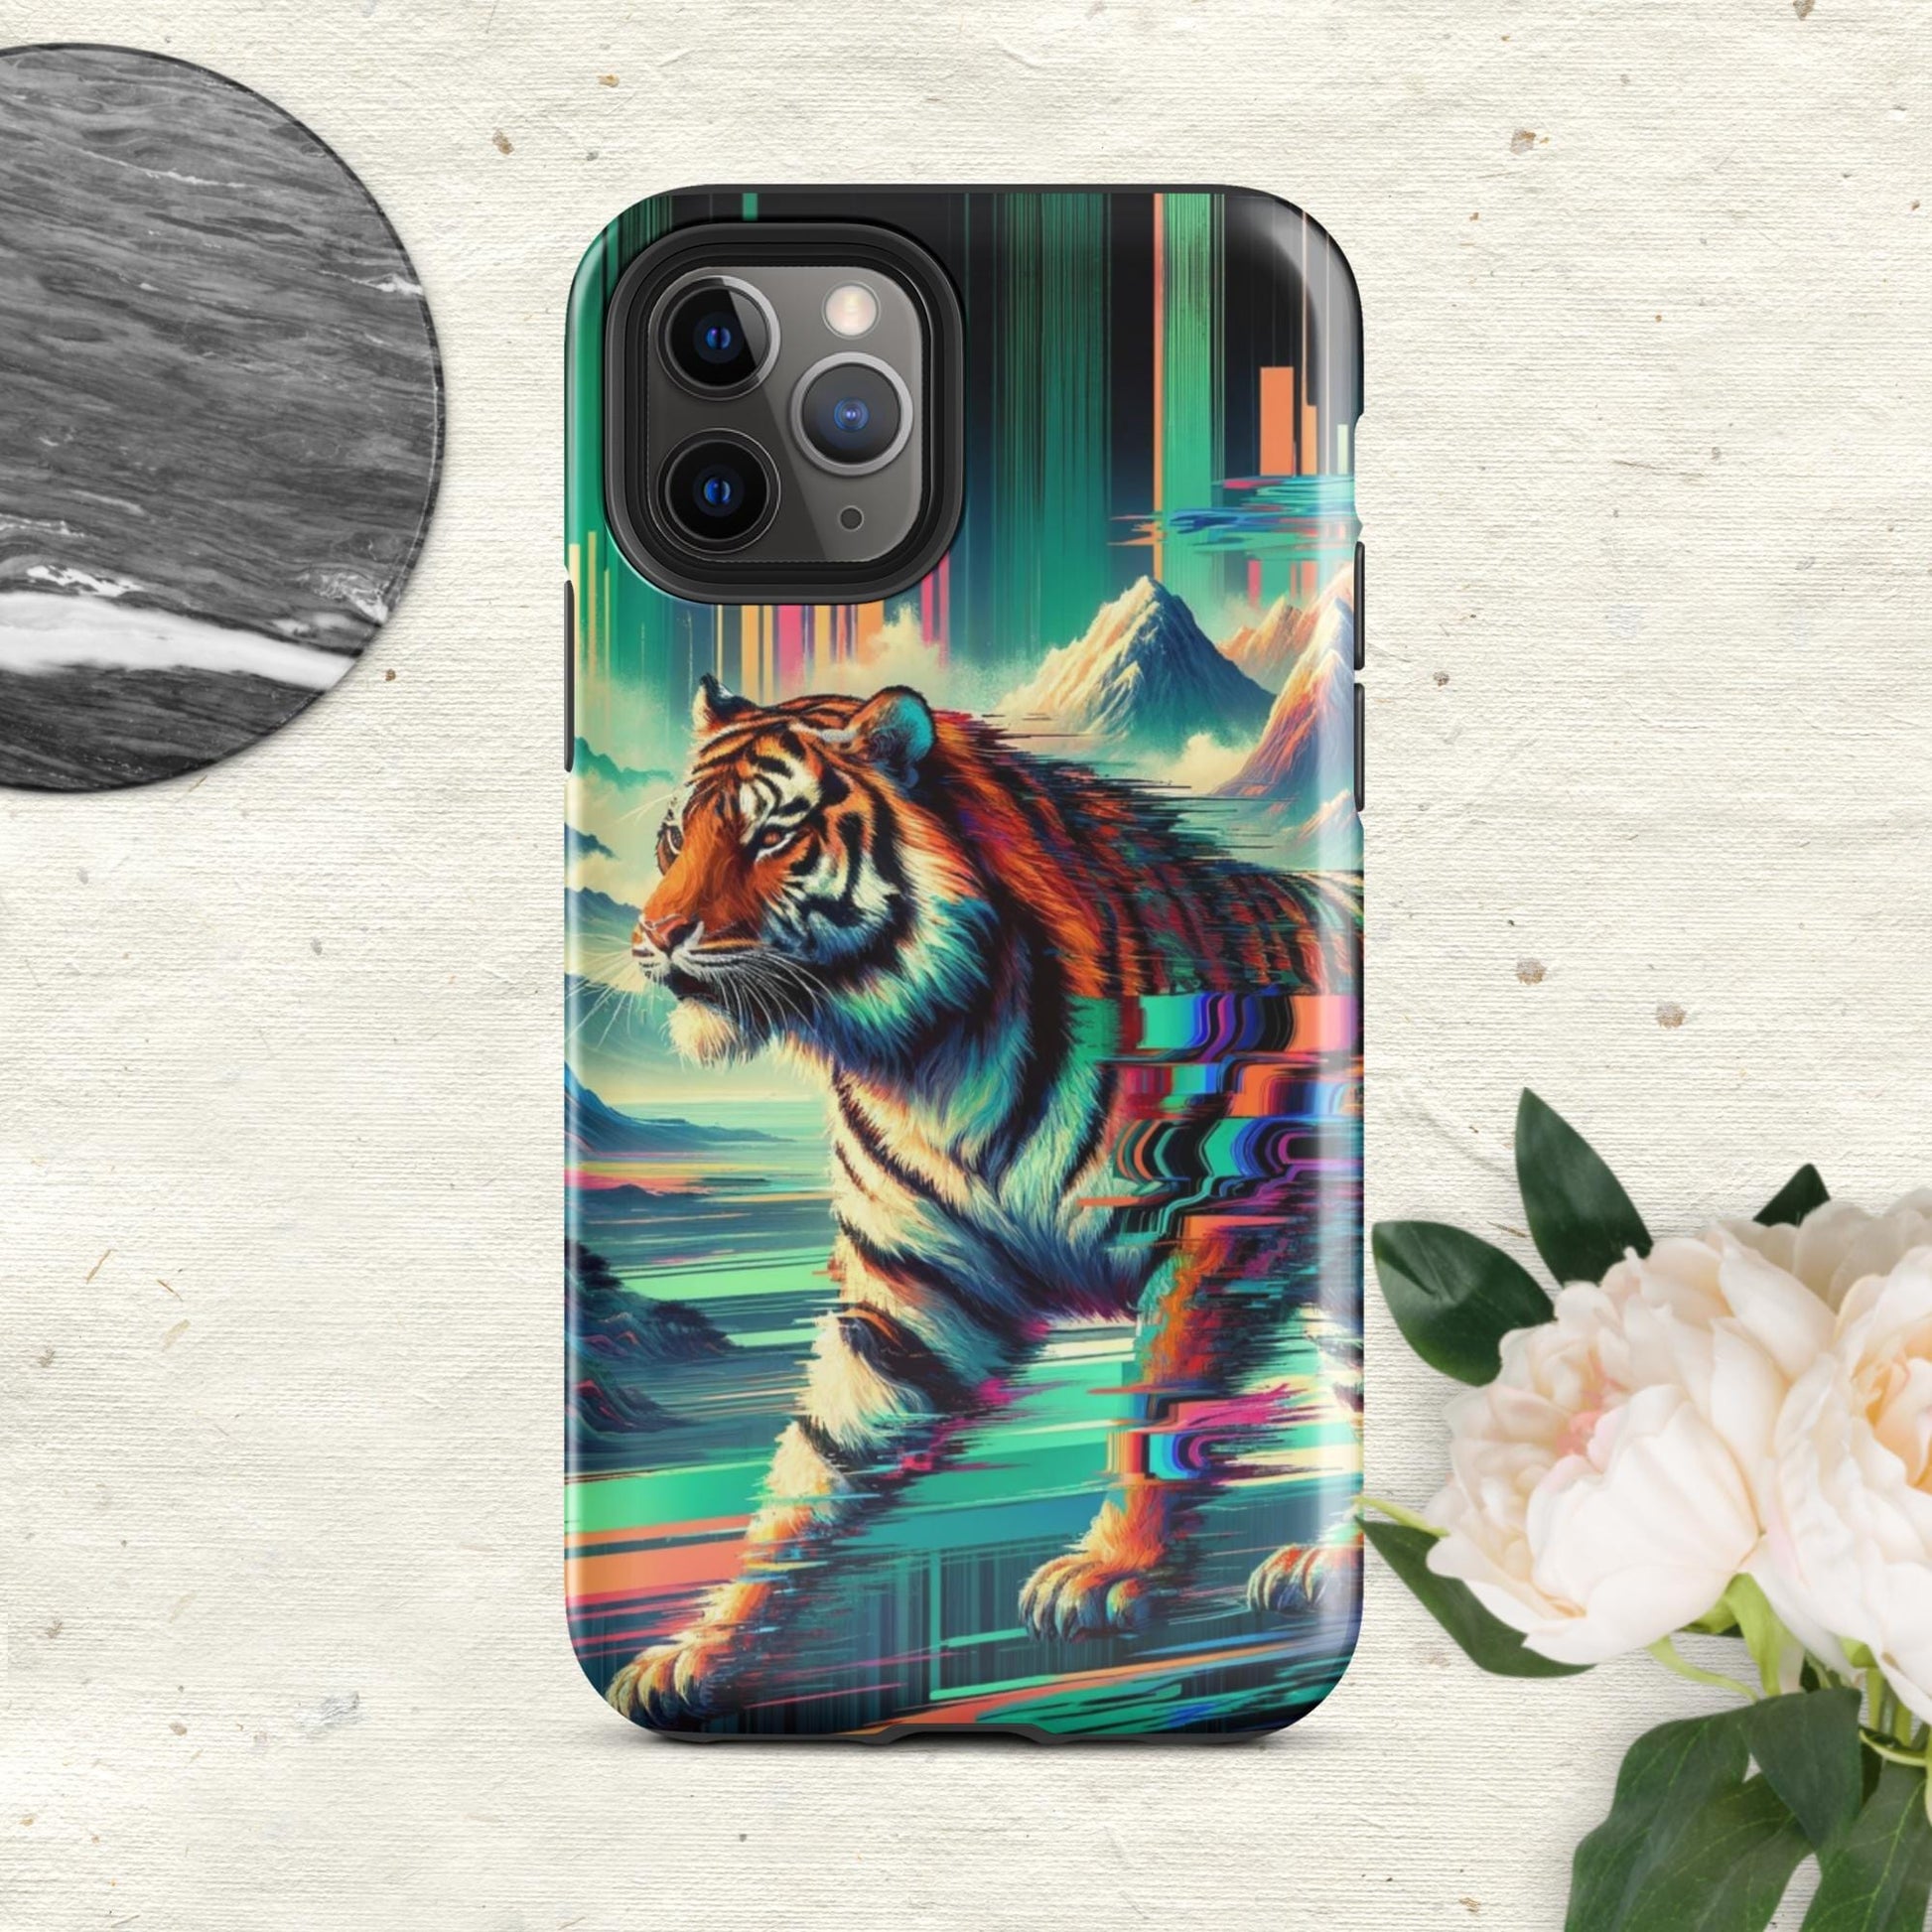 The Hologram Hook Up Glossy / iPhone 11 Pro Tiger Glitch Tough Case for iPhone®